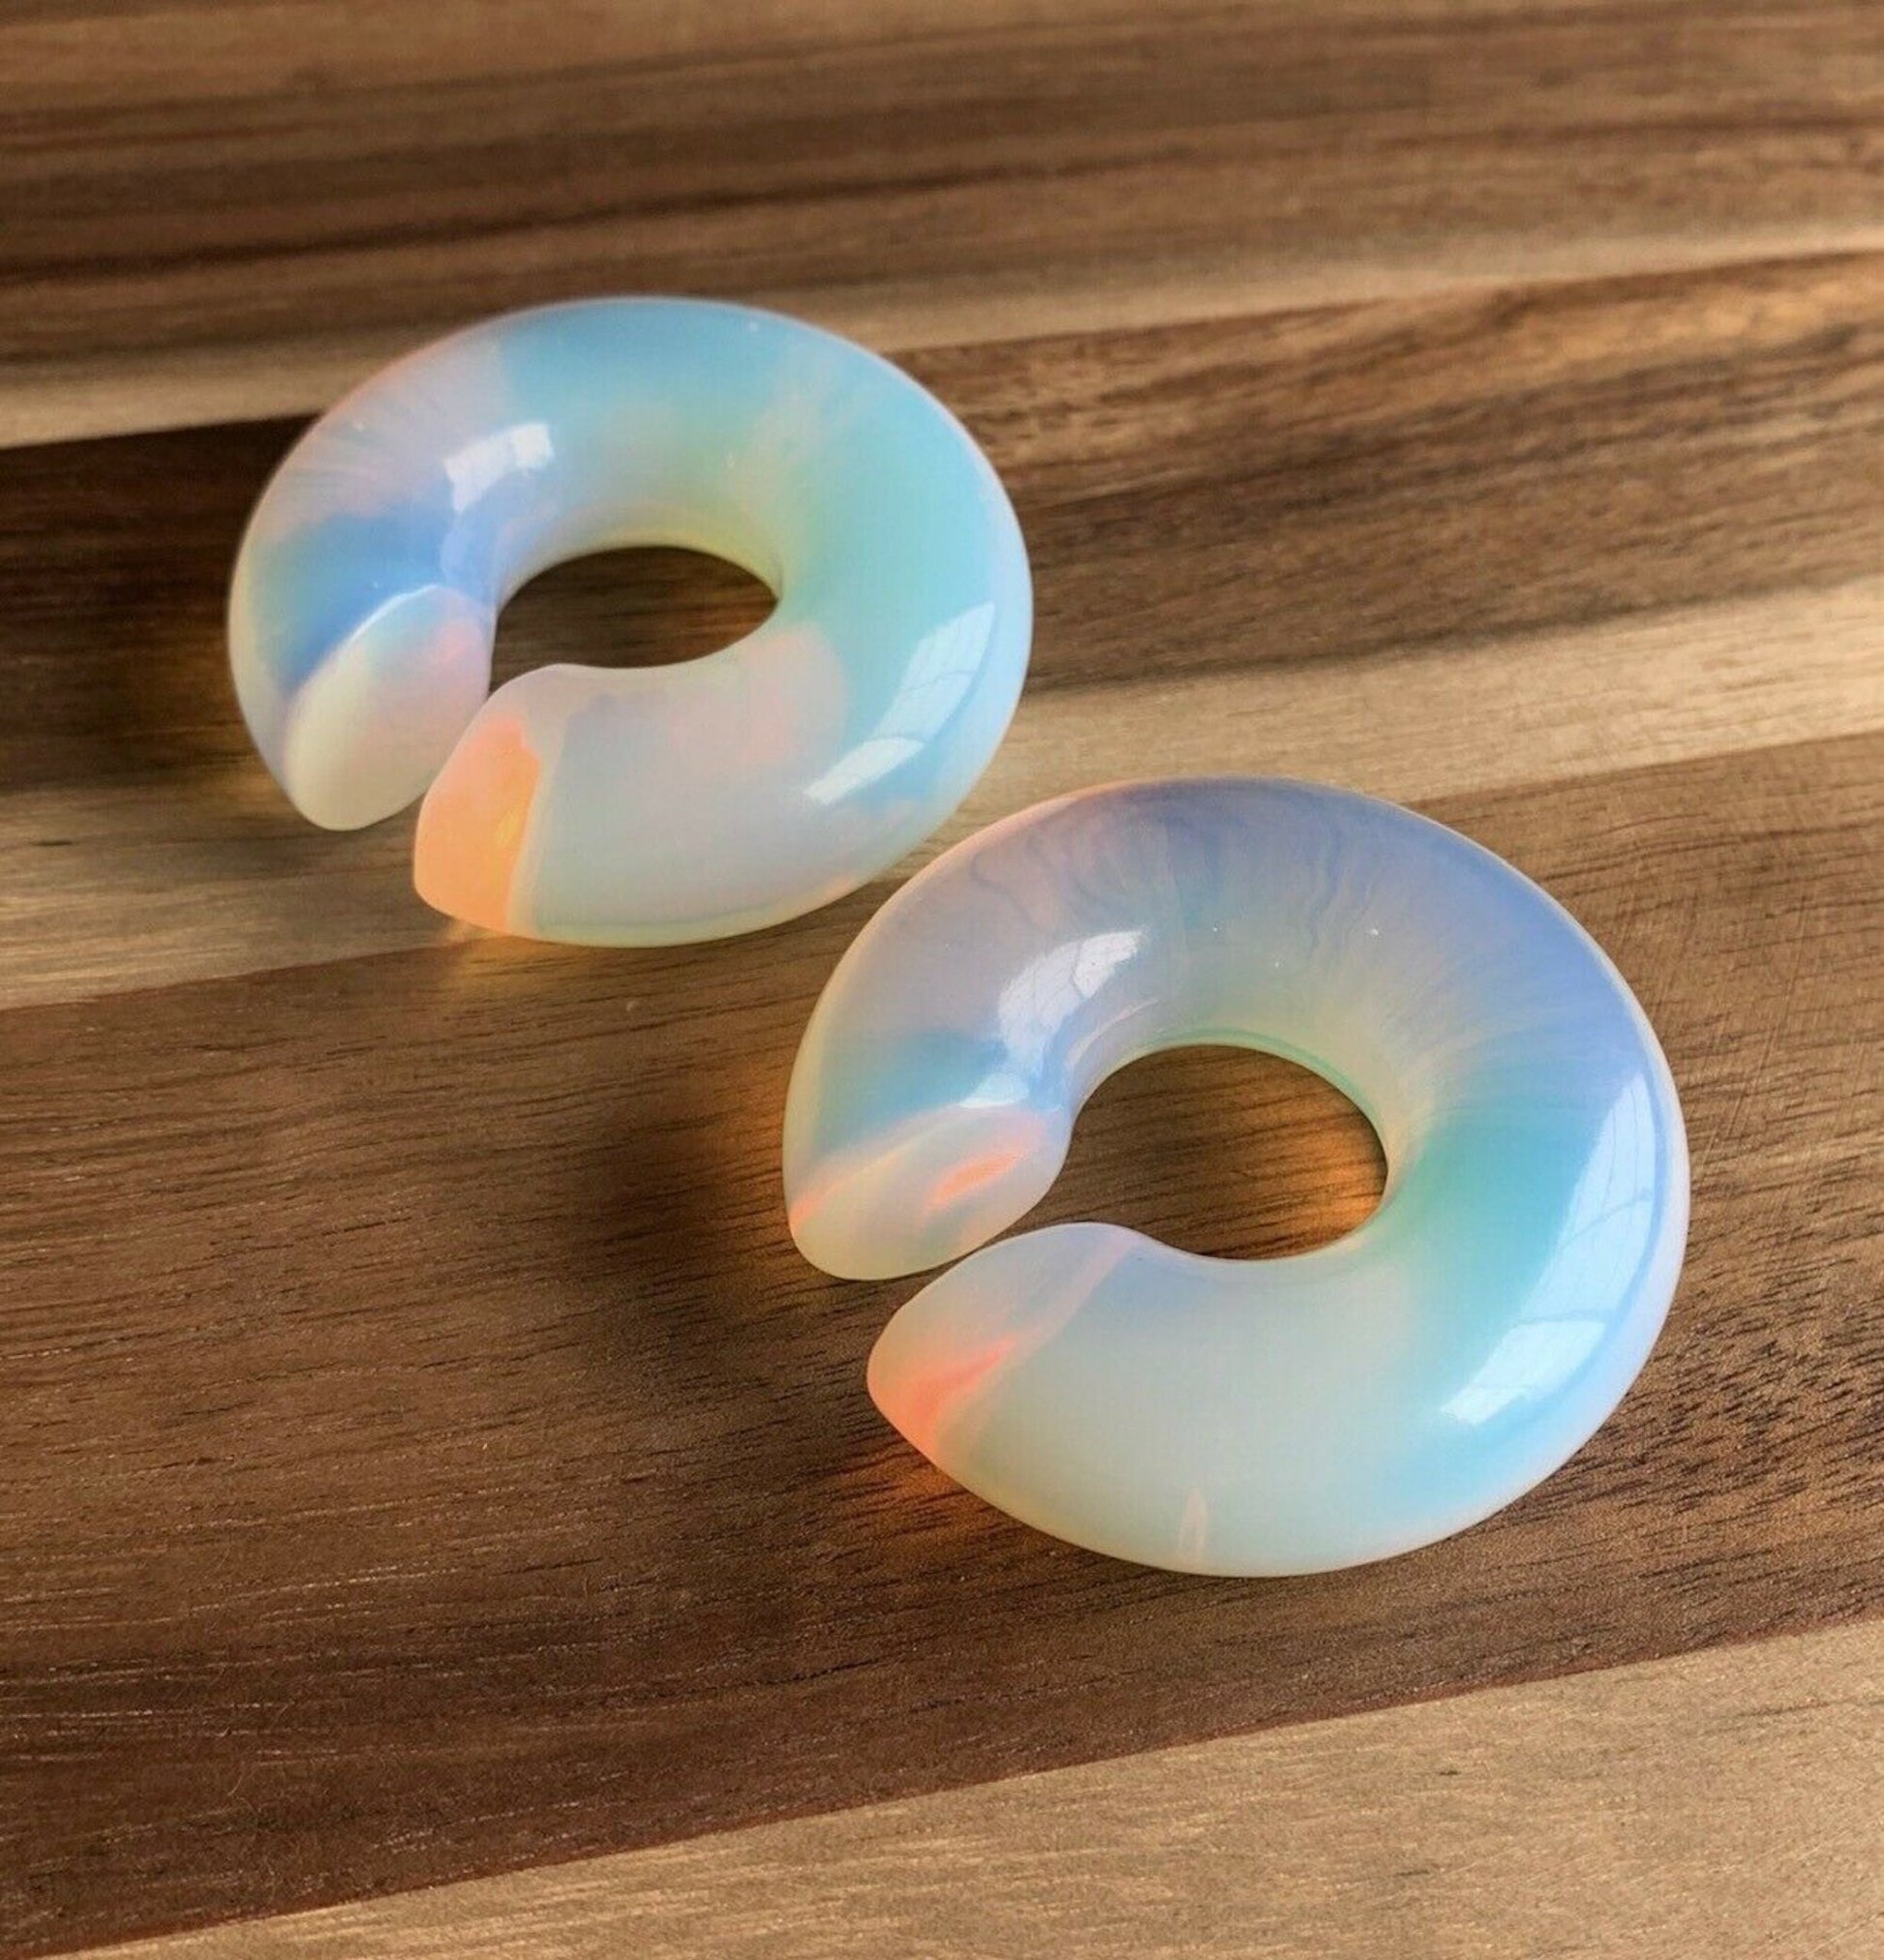 PAIR of Unique Opalite Stone Hoops Ear Weight Hanging Glass Plugs - Gauges 4g (5mm) up to 5/8" (16mm) available!